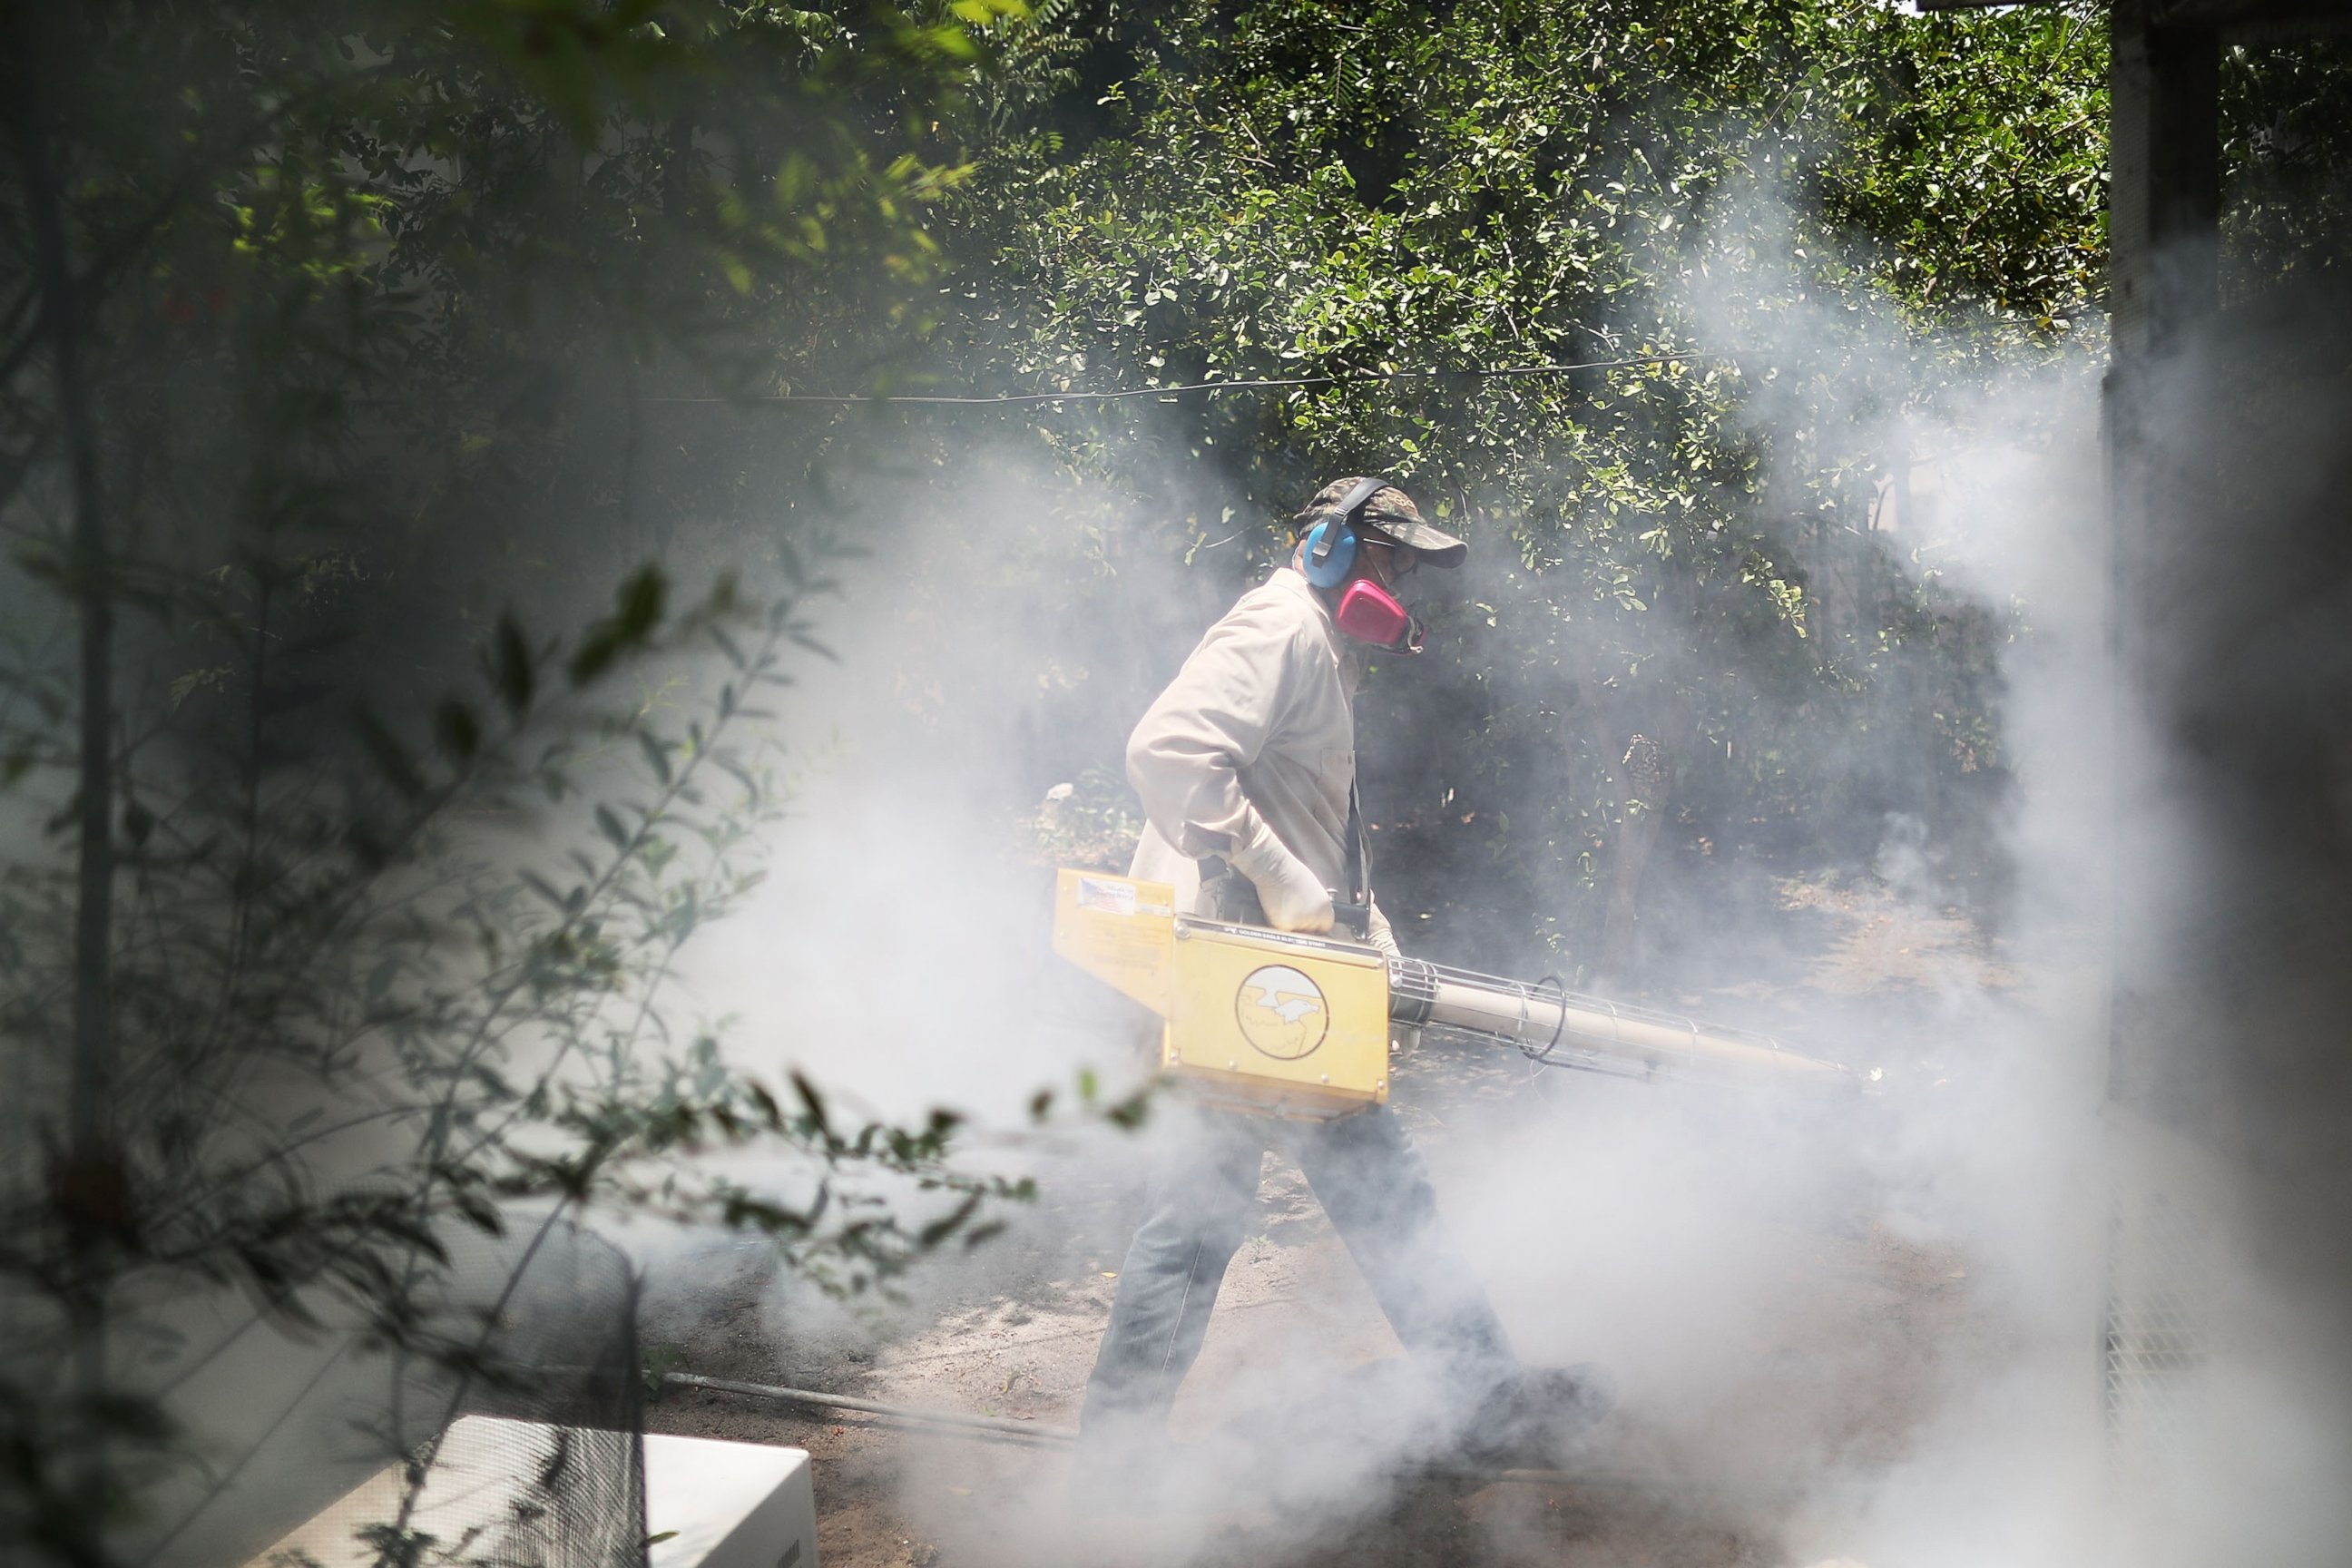 PHOTO: Carlos Varas, a Miami-Dade County mosquito control inspector, uses a Golden Eagle blower to spray pesticide to kill mosquitoes in the Wynwood neighborhood as the county fights to control the Zika virus outbreak, Aug. 2, 2016 in Miami.